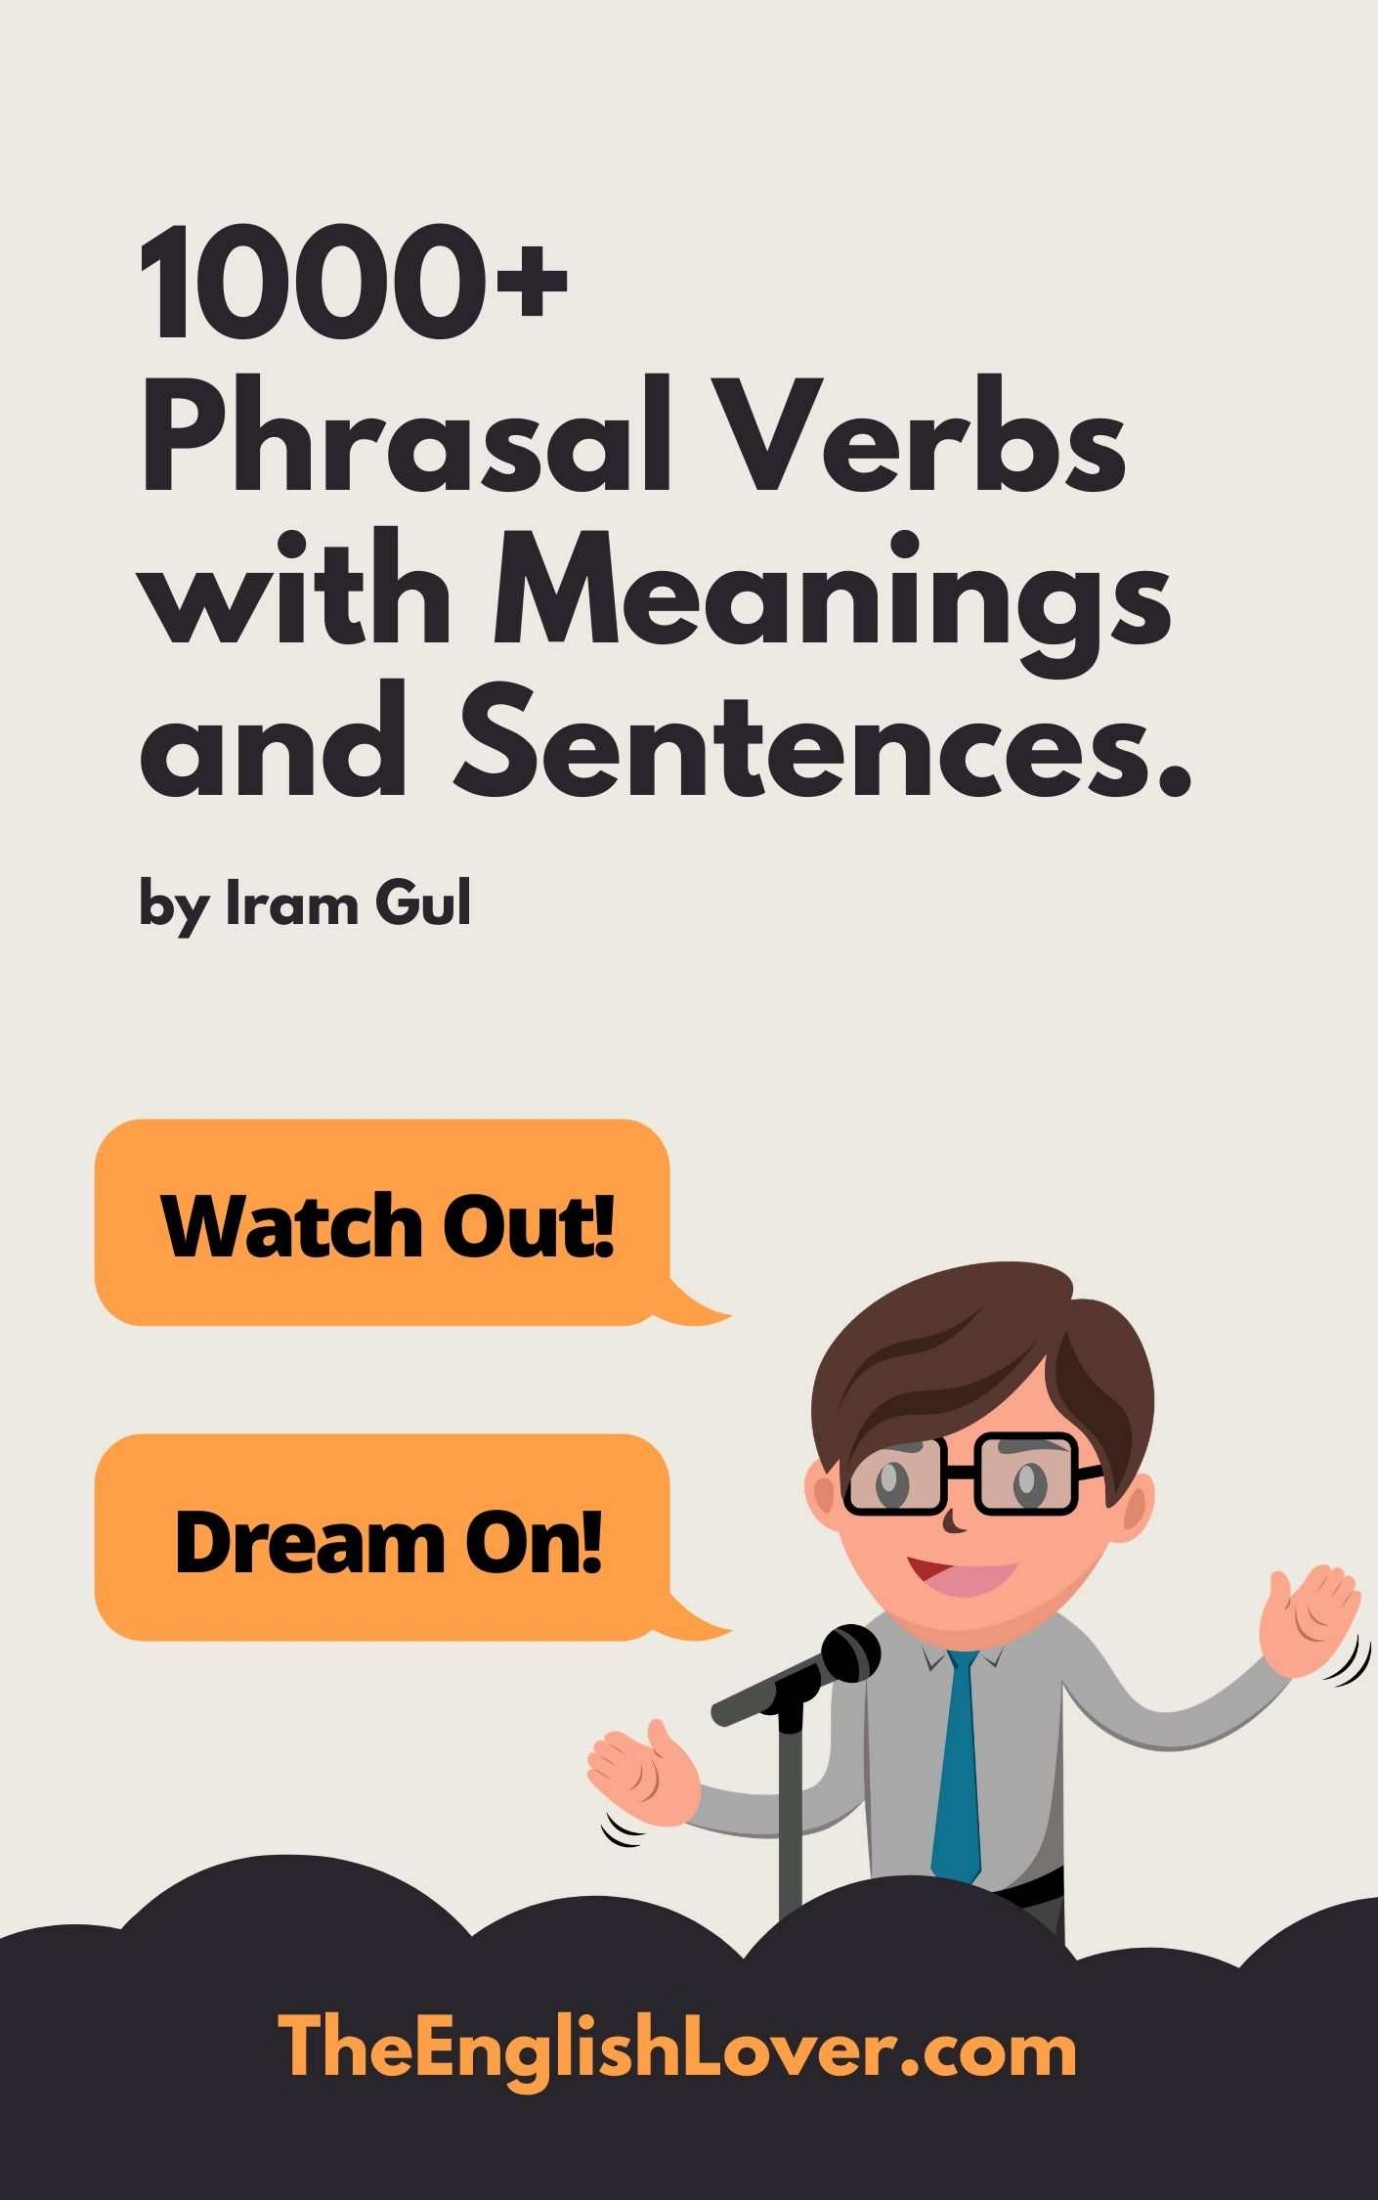 1000+ Phrasal Verbs with meanings and sentences: Learn English with A to Z Phrasal verbs